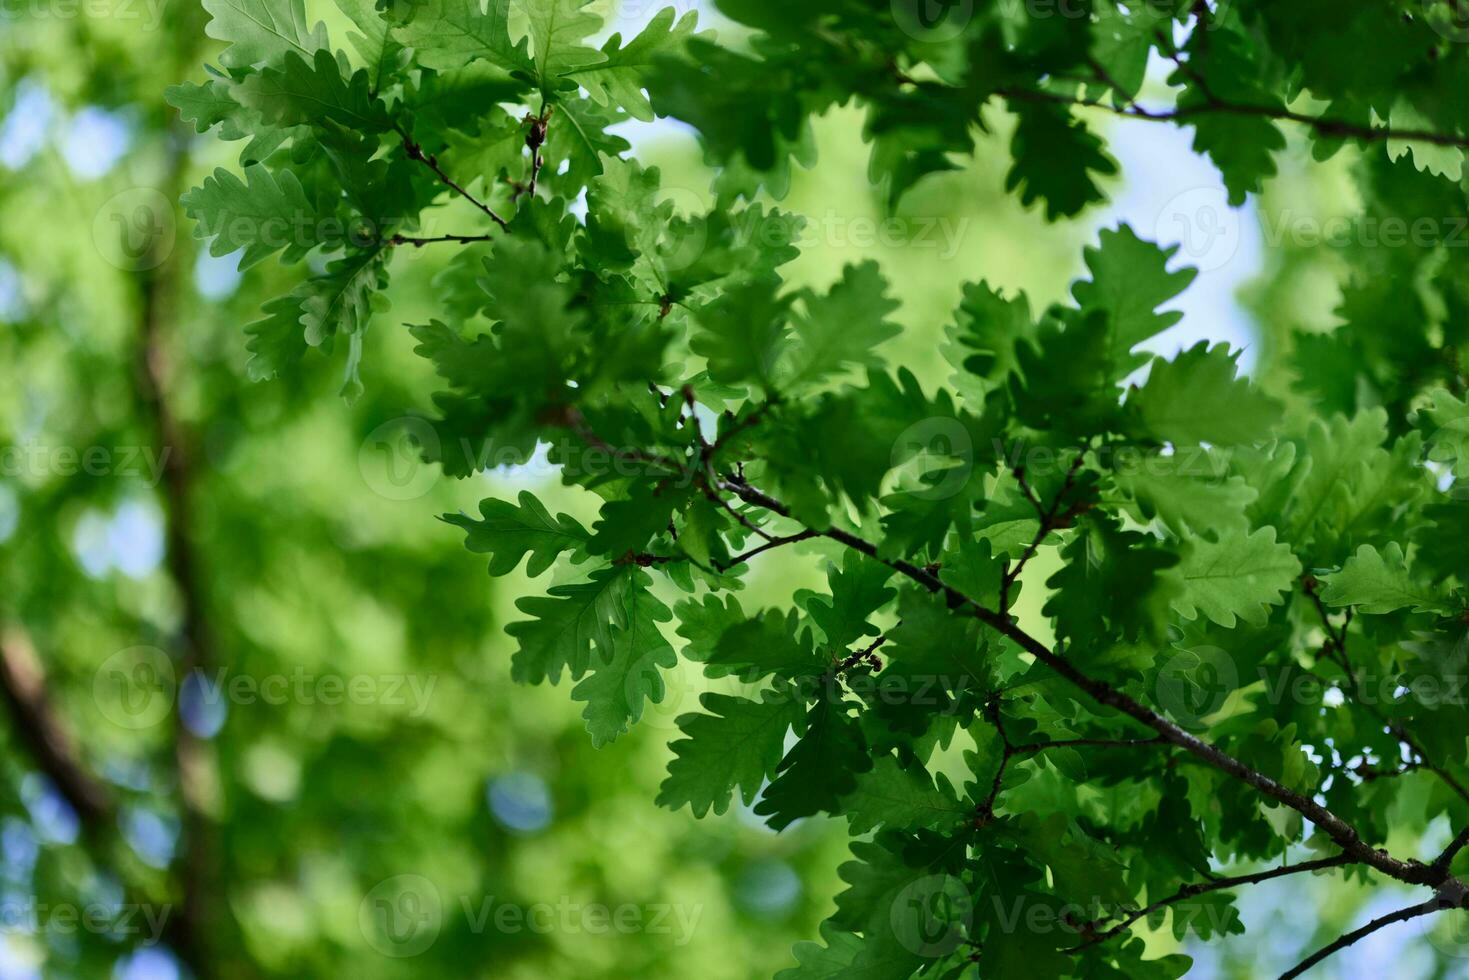 Green fresh leaves on oak branches close-up against the sky in sunlight photo